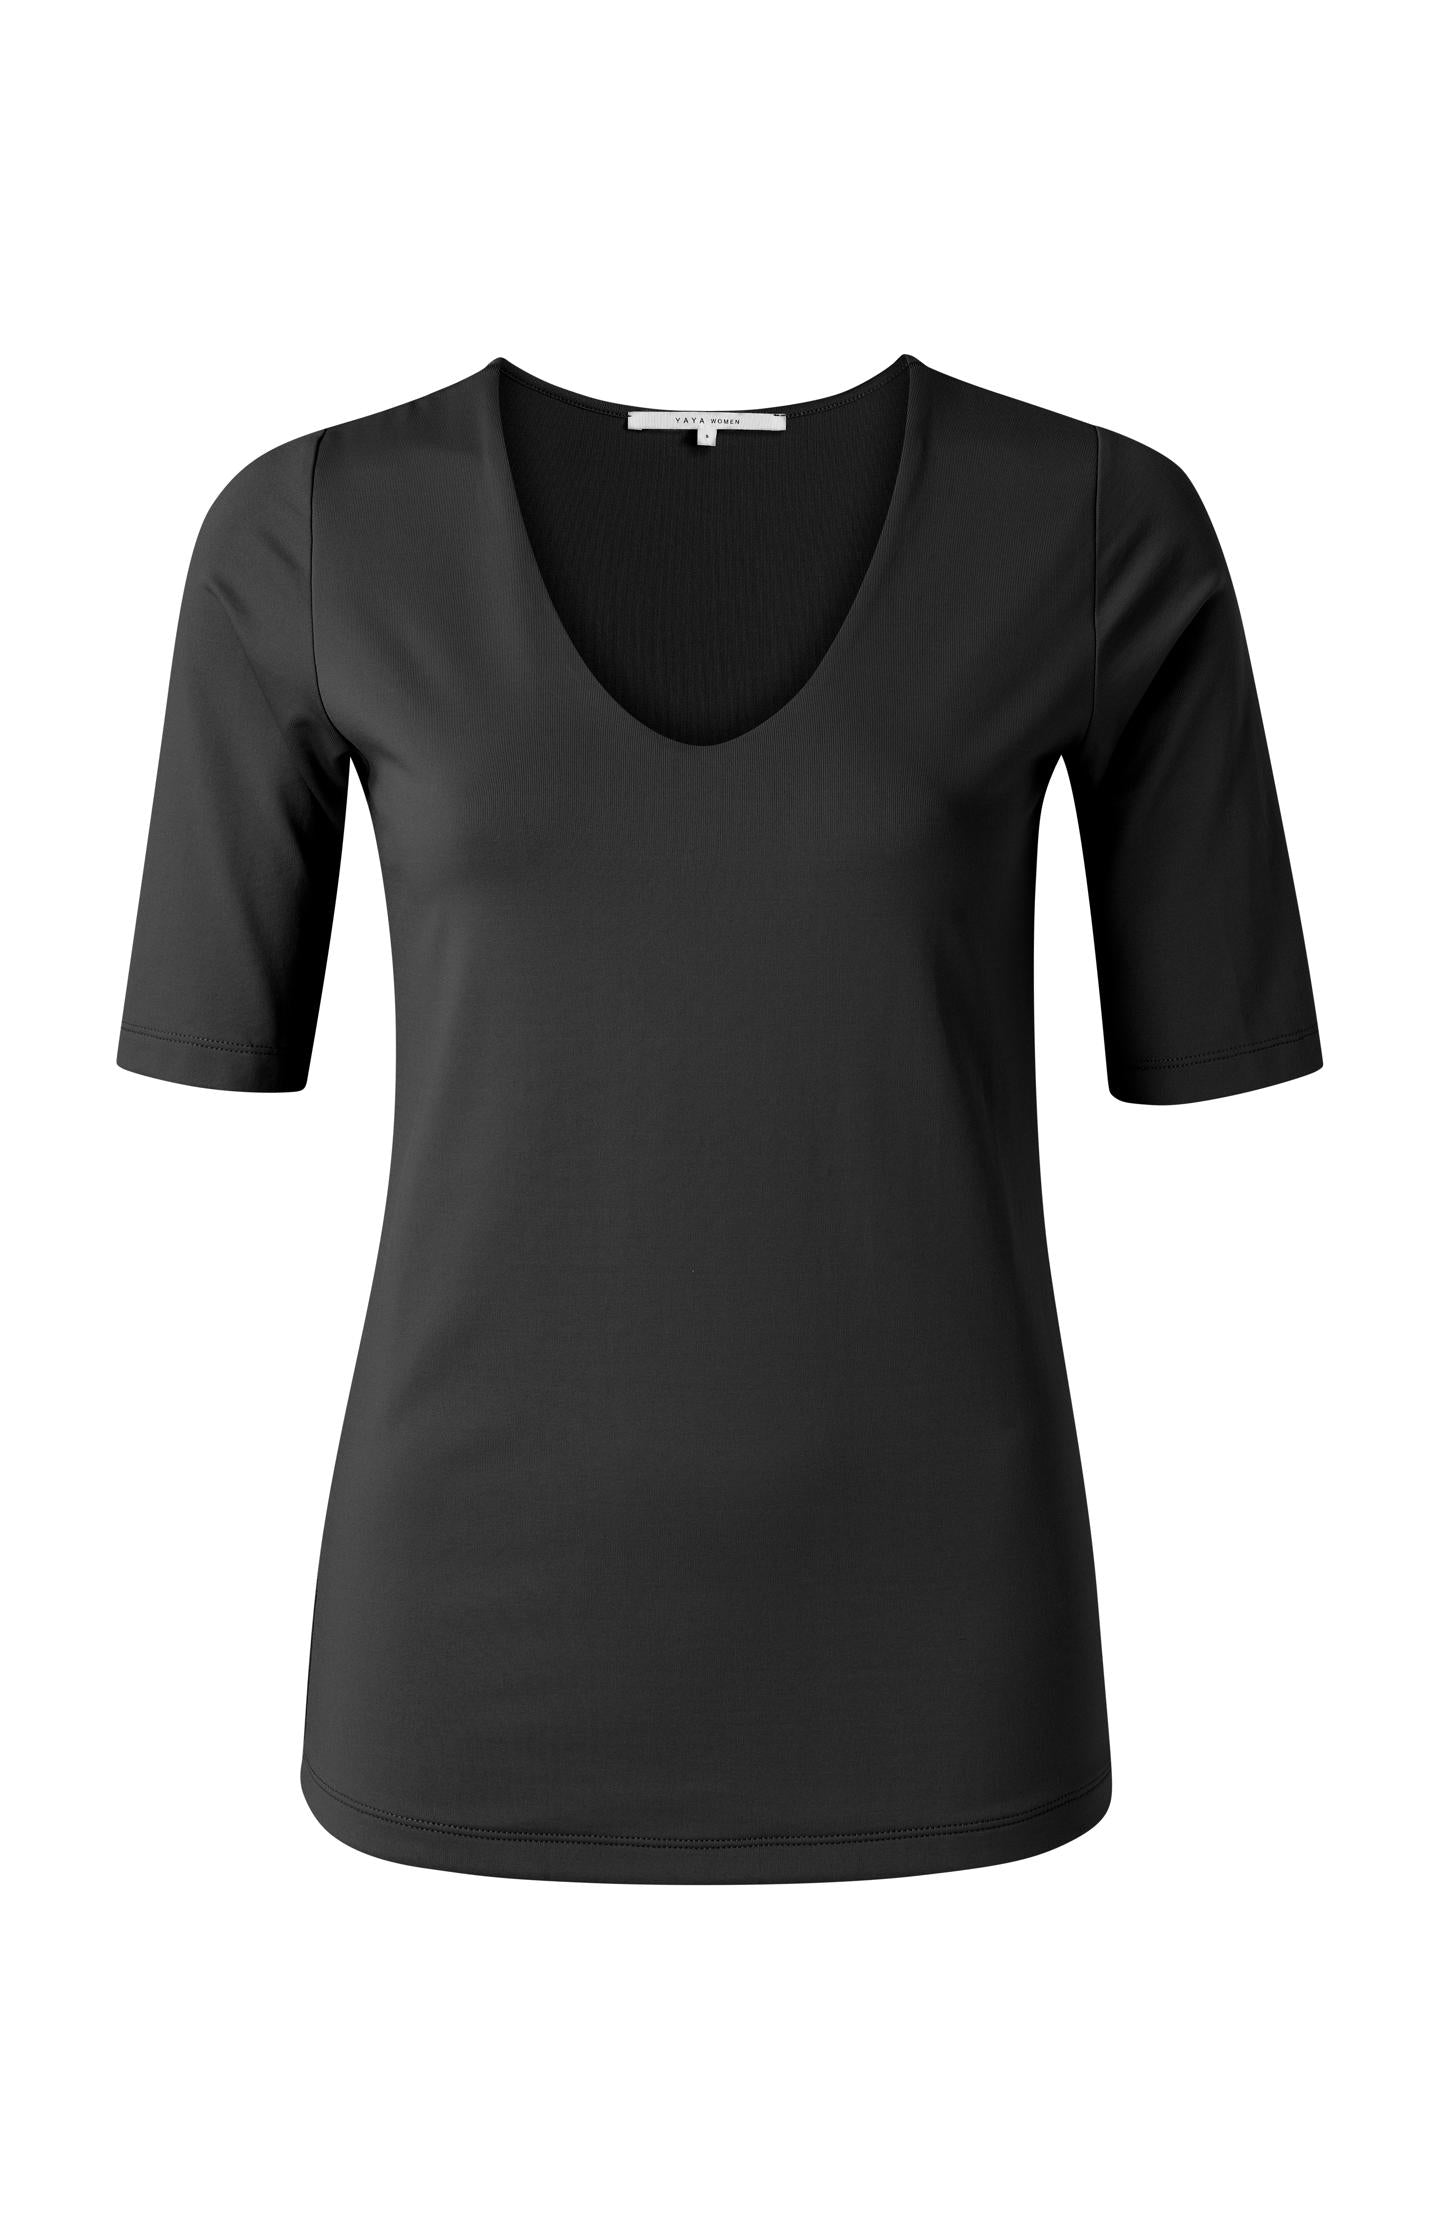 Round V-neck top with half sleeves - Type: product